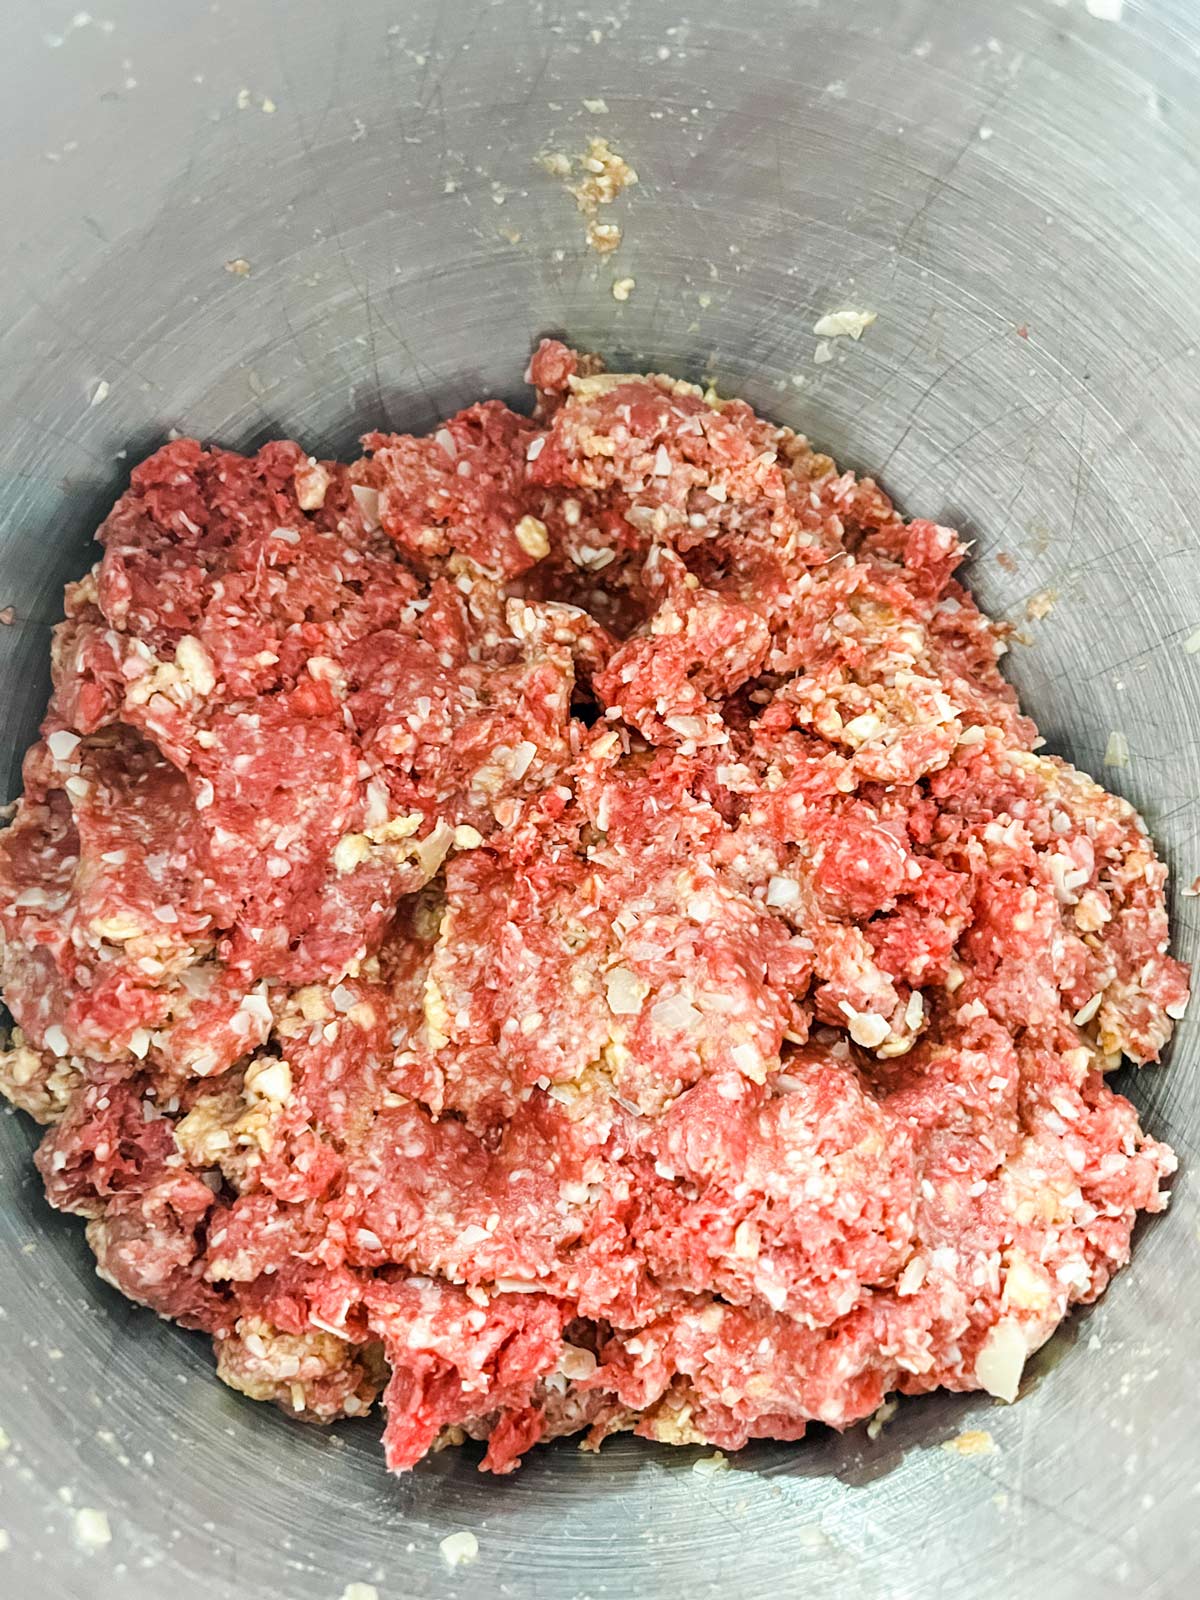 A meatloaf mixture in a bowl.